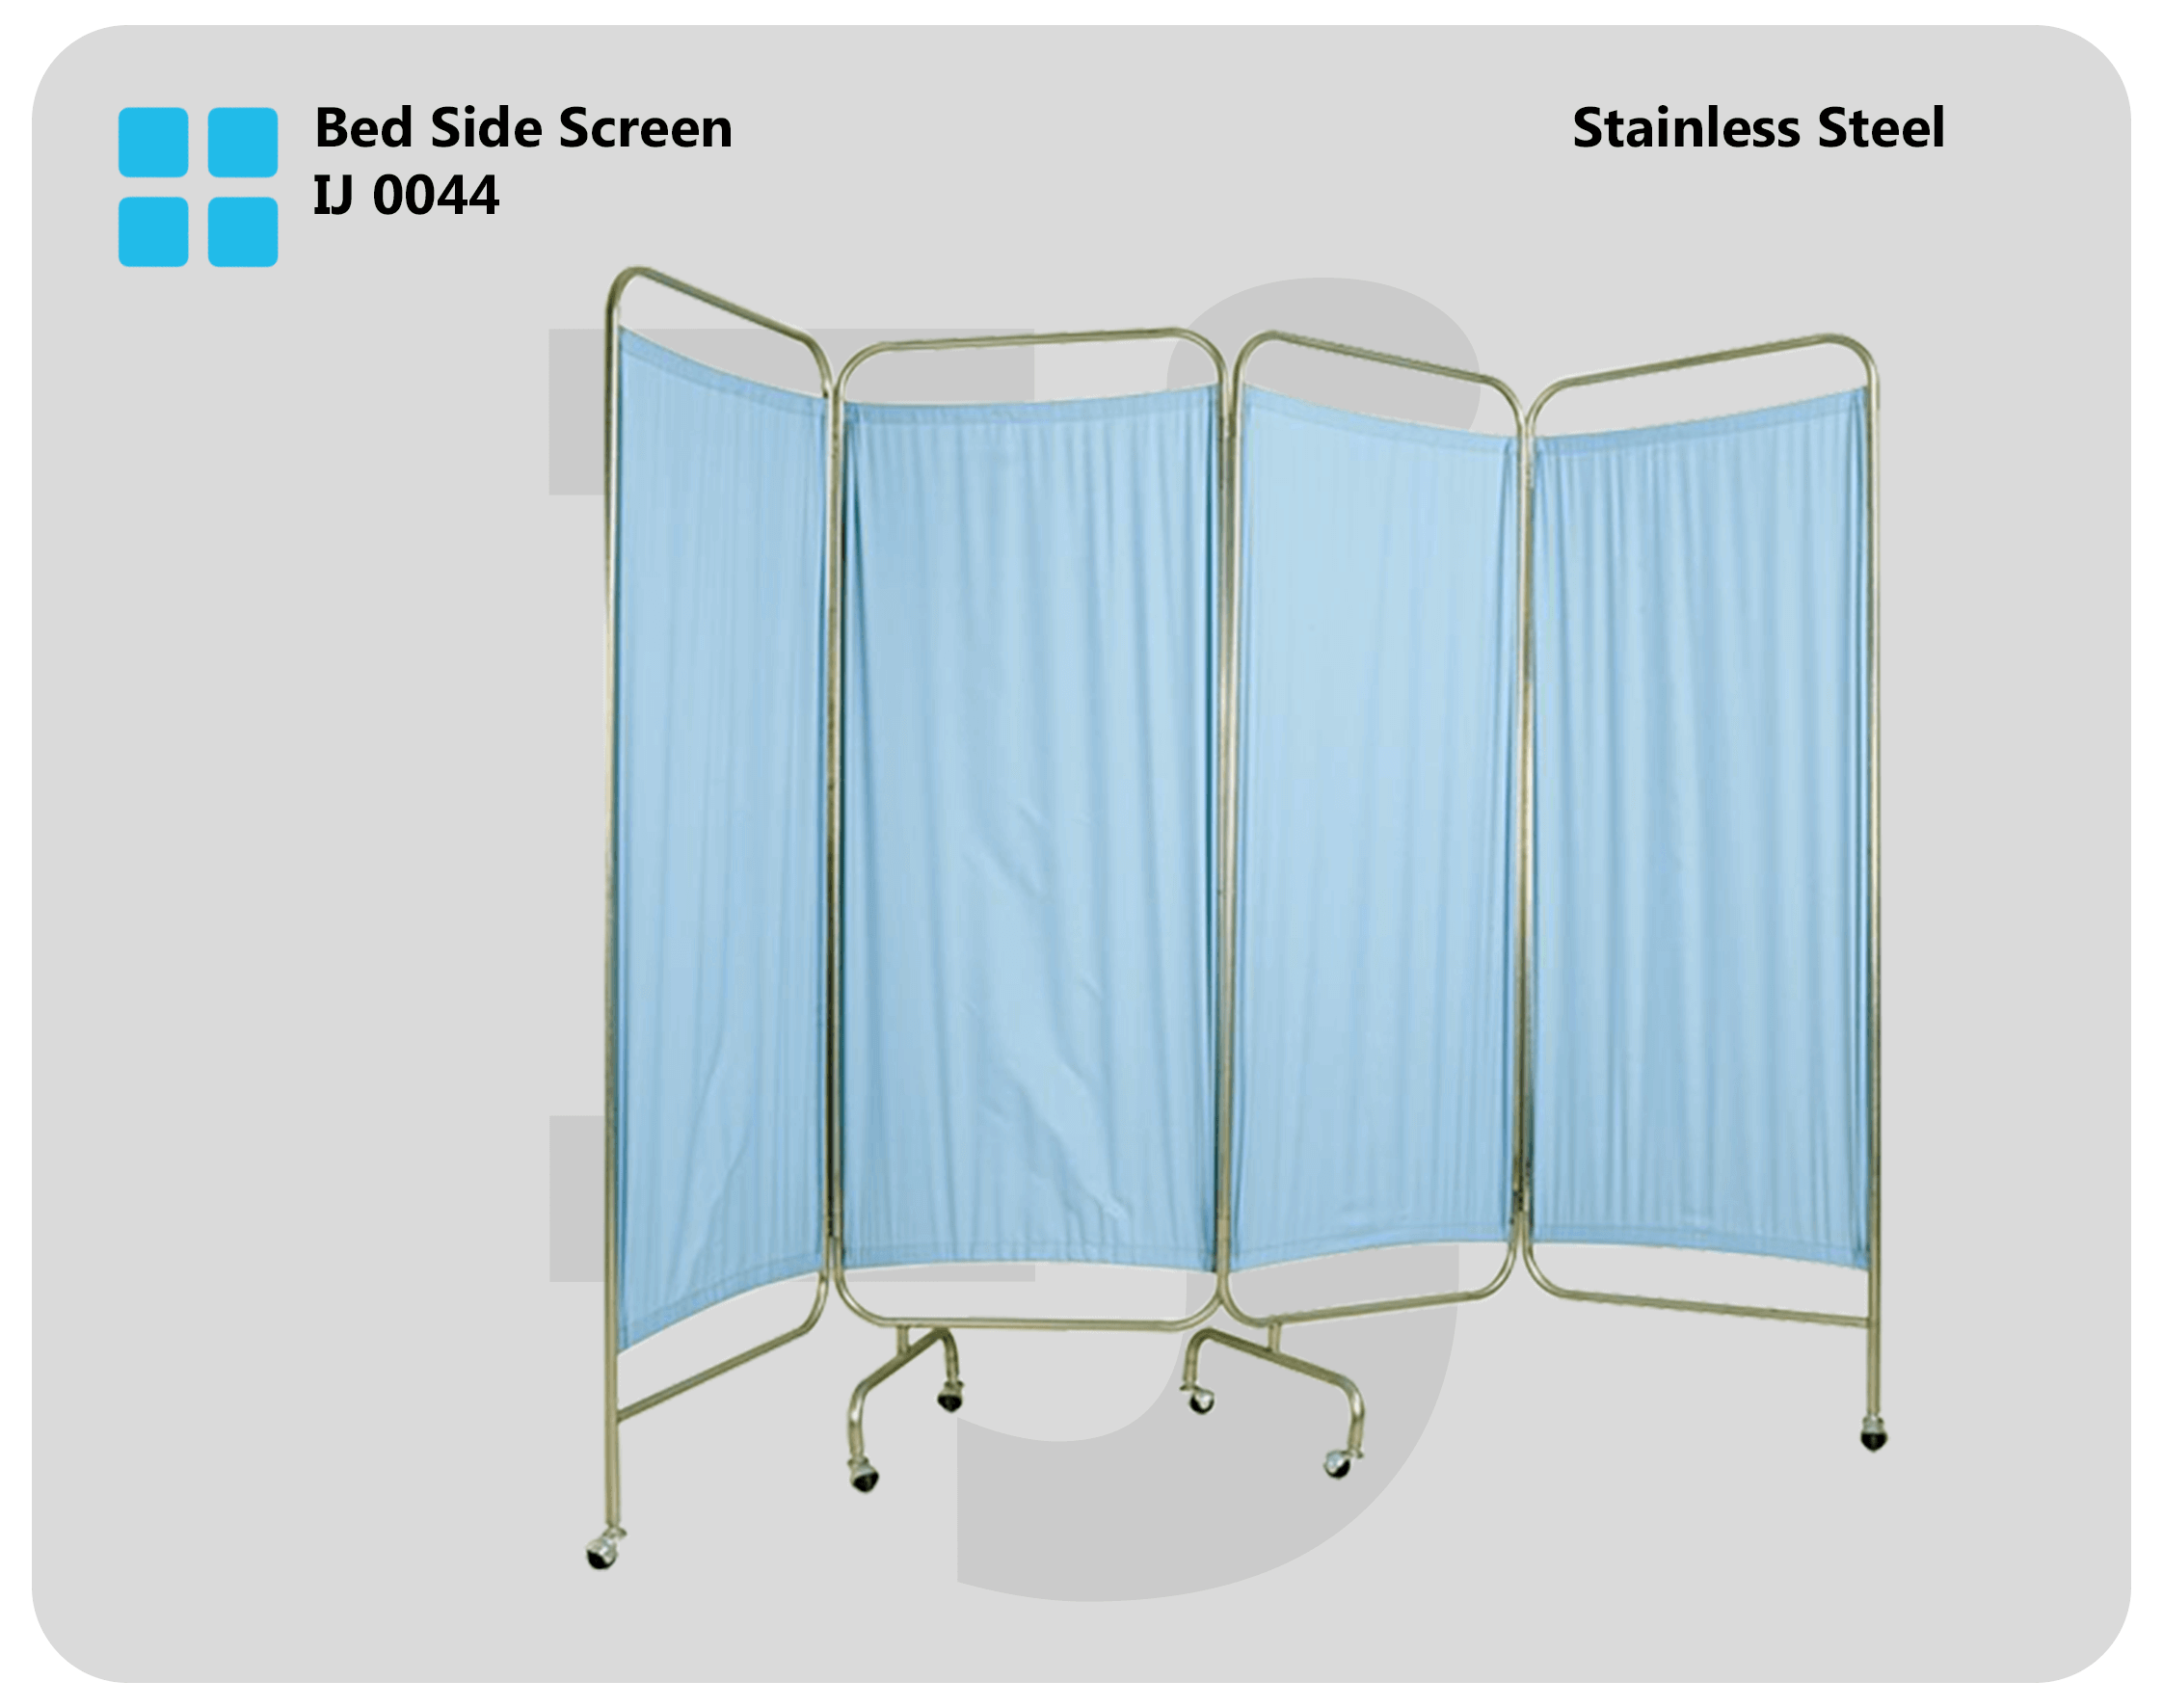 Bed Side Screen